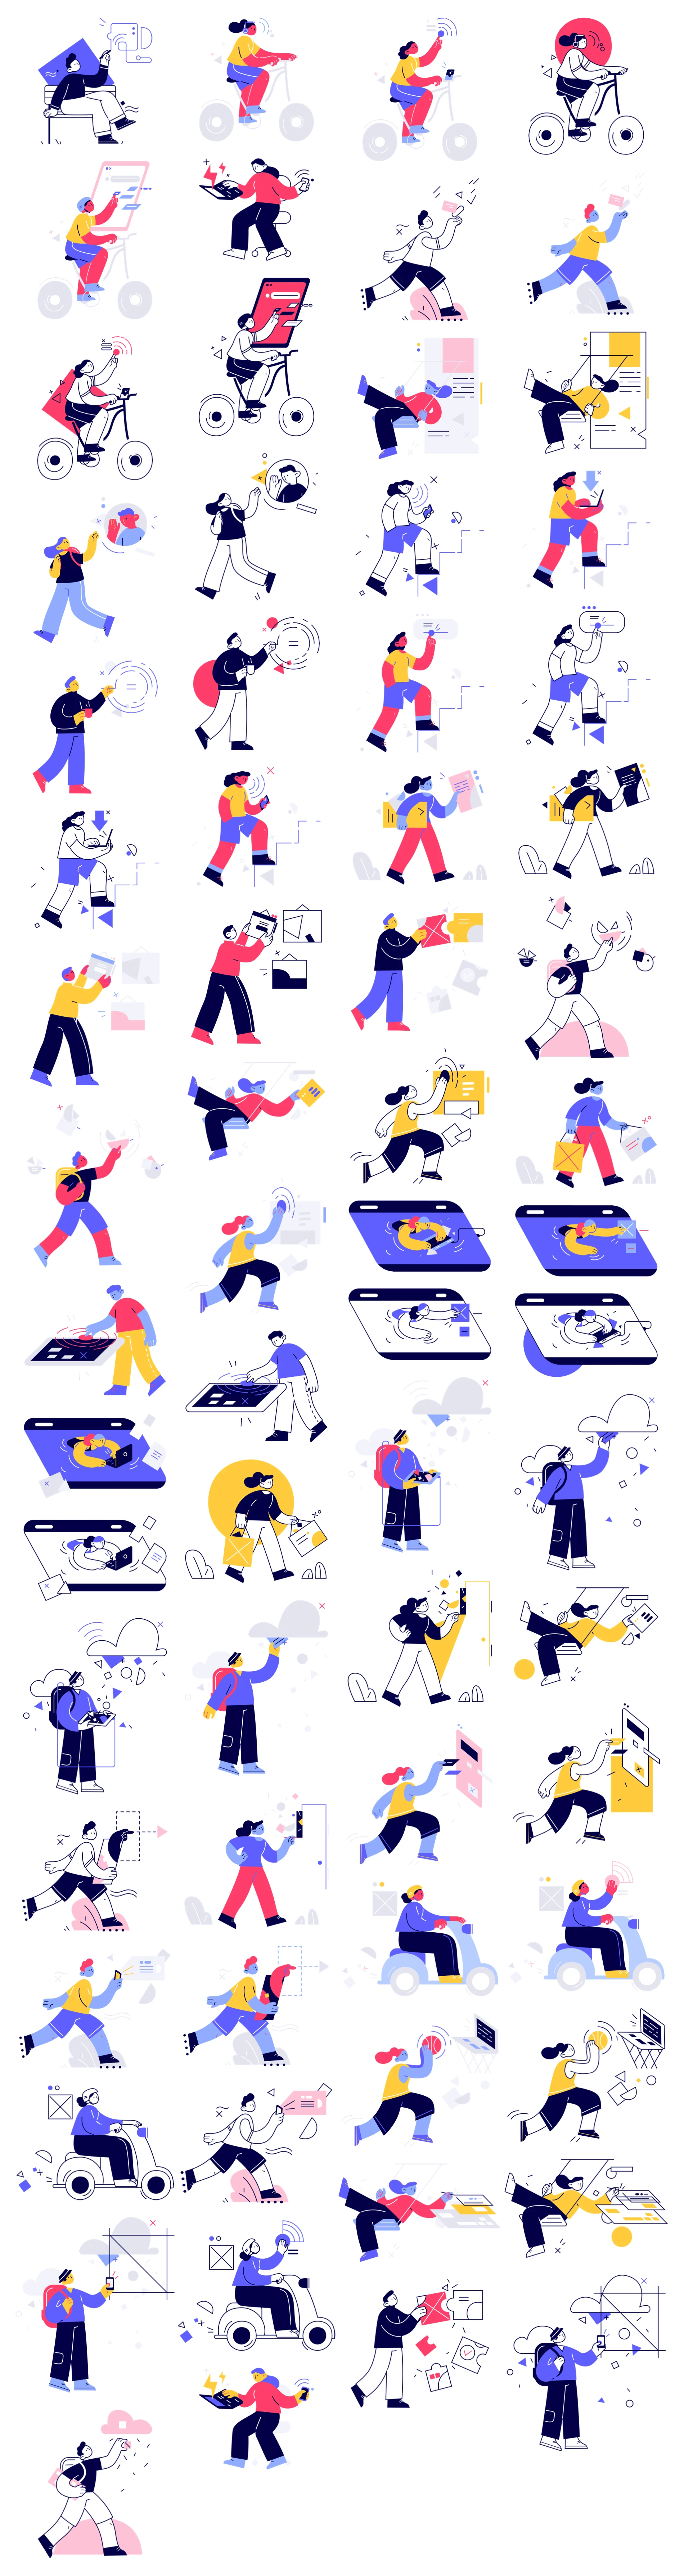 Control Free Illustrations - Control is a stylish illustration library with 18 characters with 3 different action scenes for each illustration. All illustrations are available in 2 styles: solid and linear. Download PNG files for free or purchase the pack and get access to fully editable AI & SVG files.